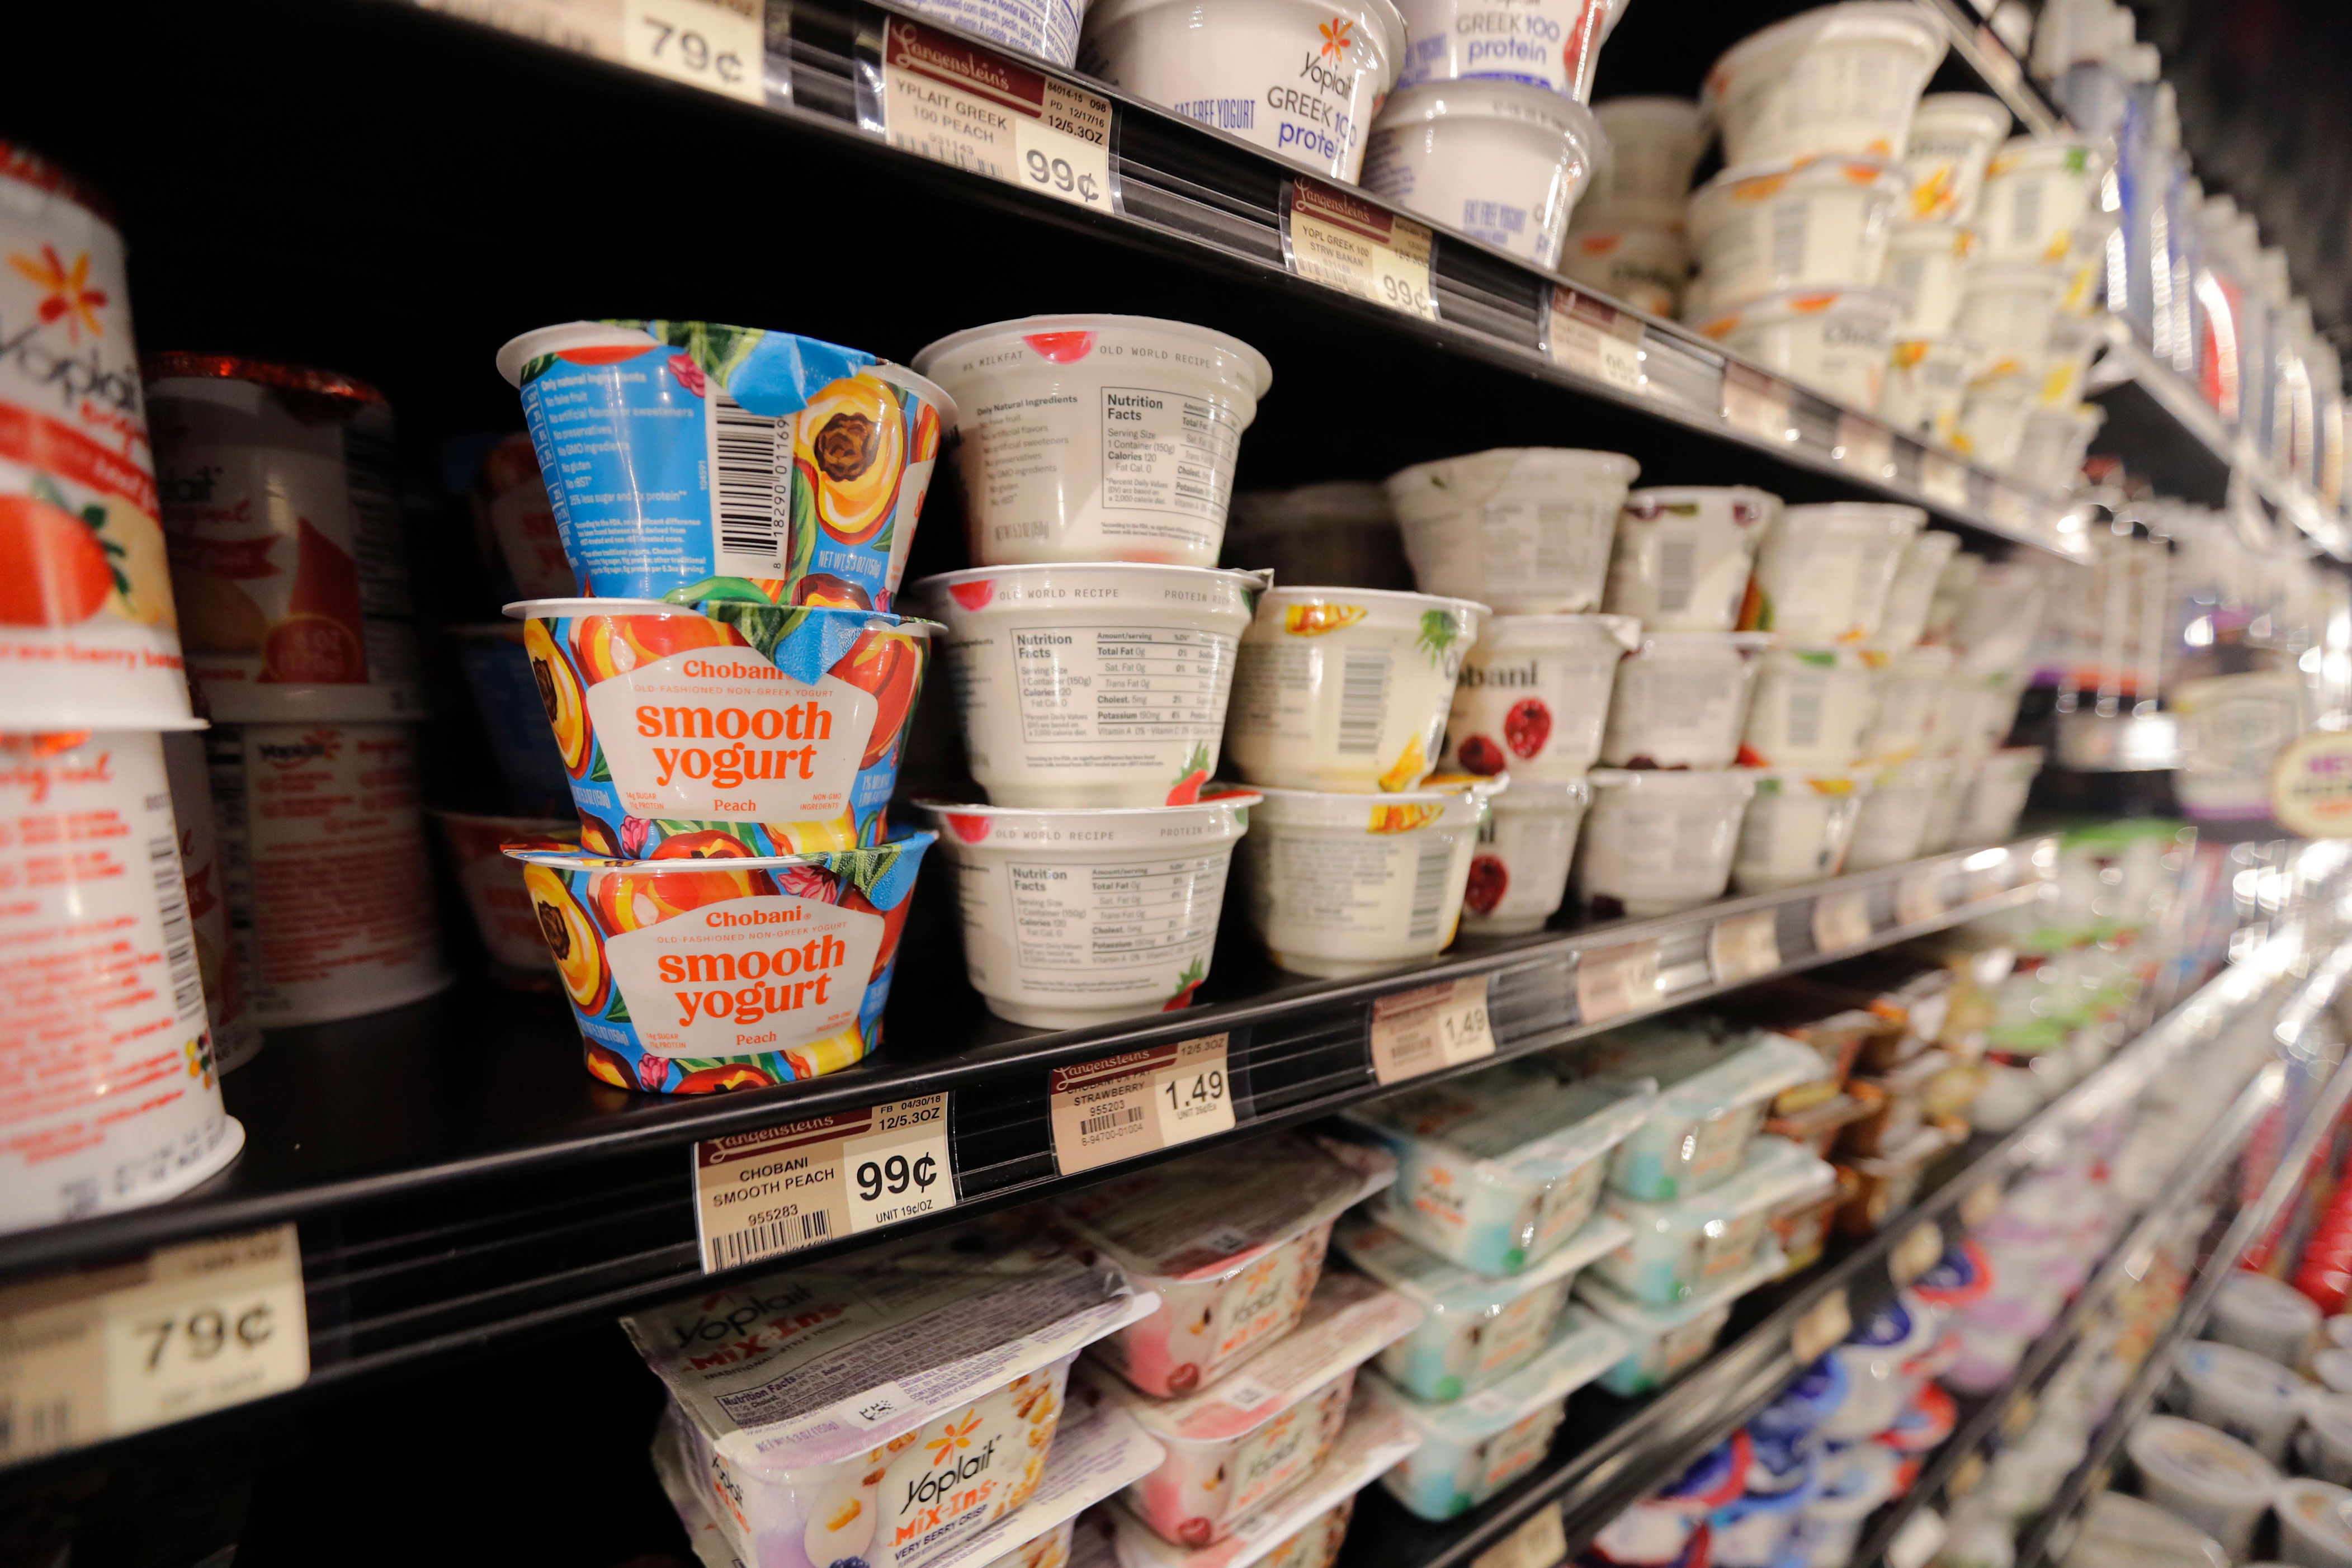 can yogurt really reduce the risk of type 2 diabetes? producers say so